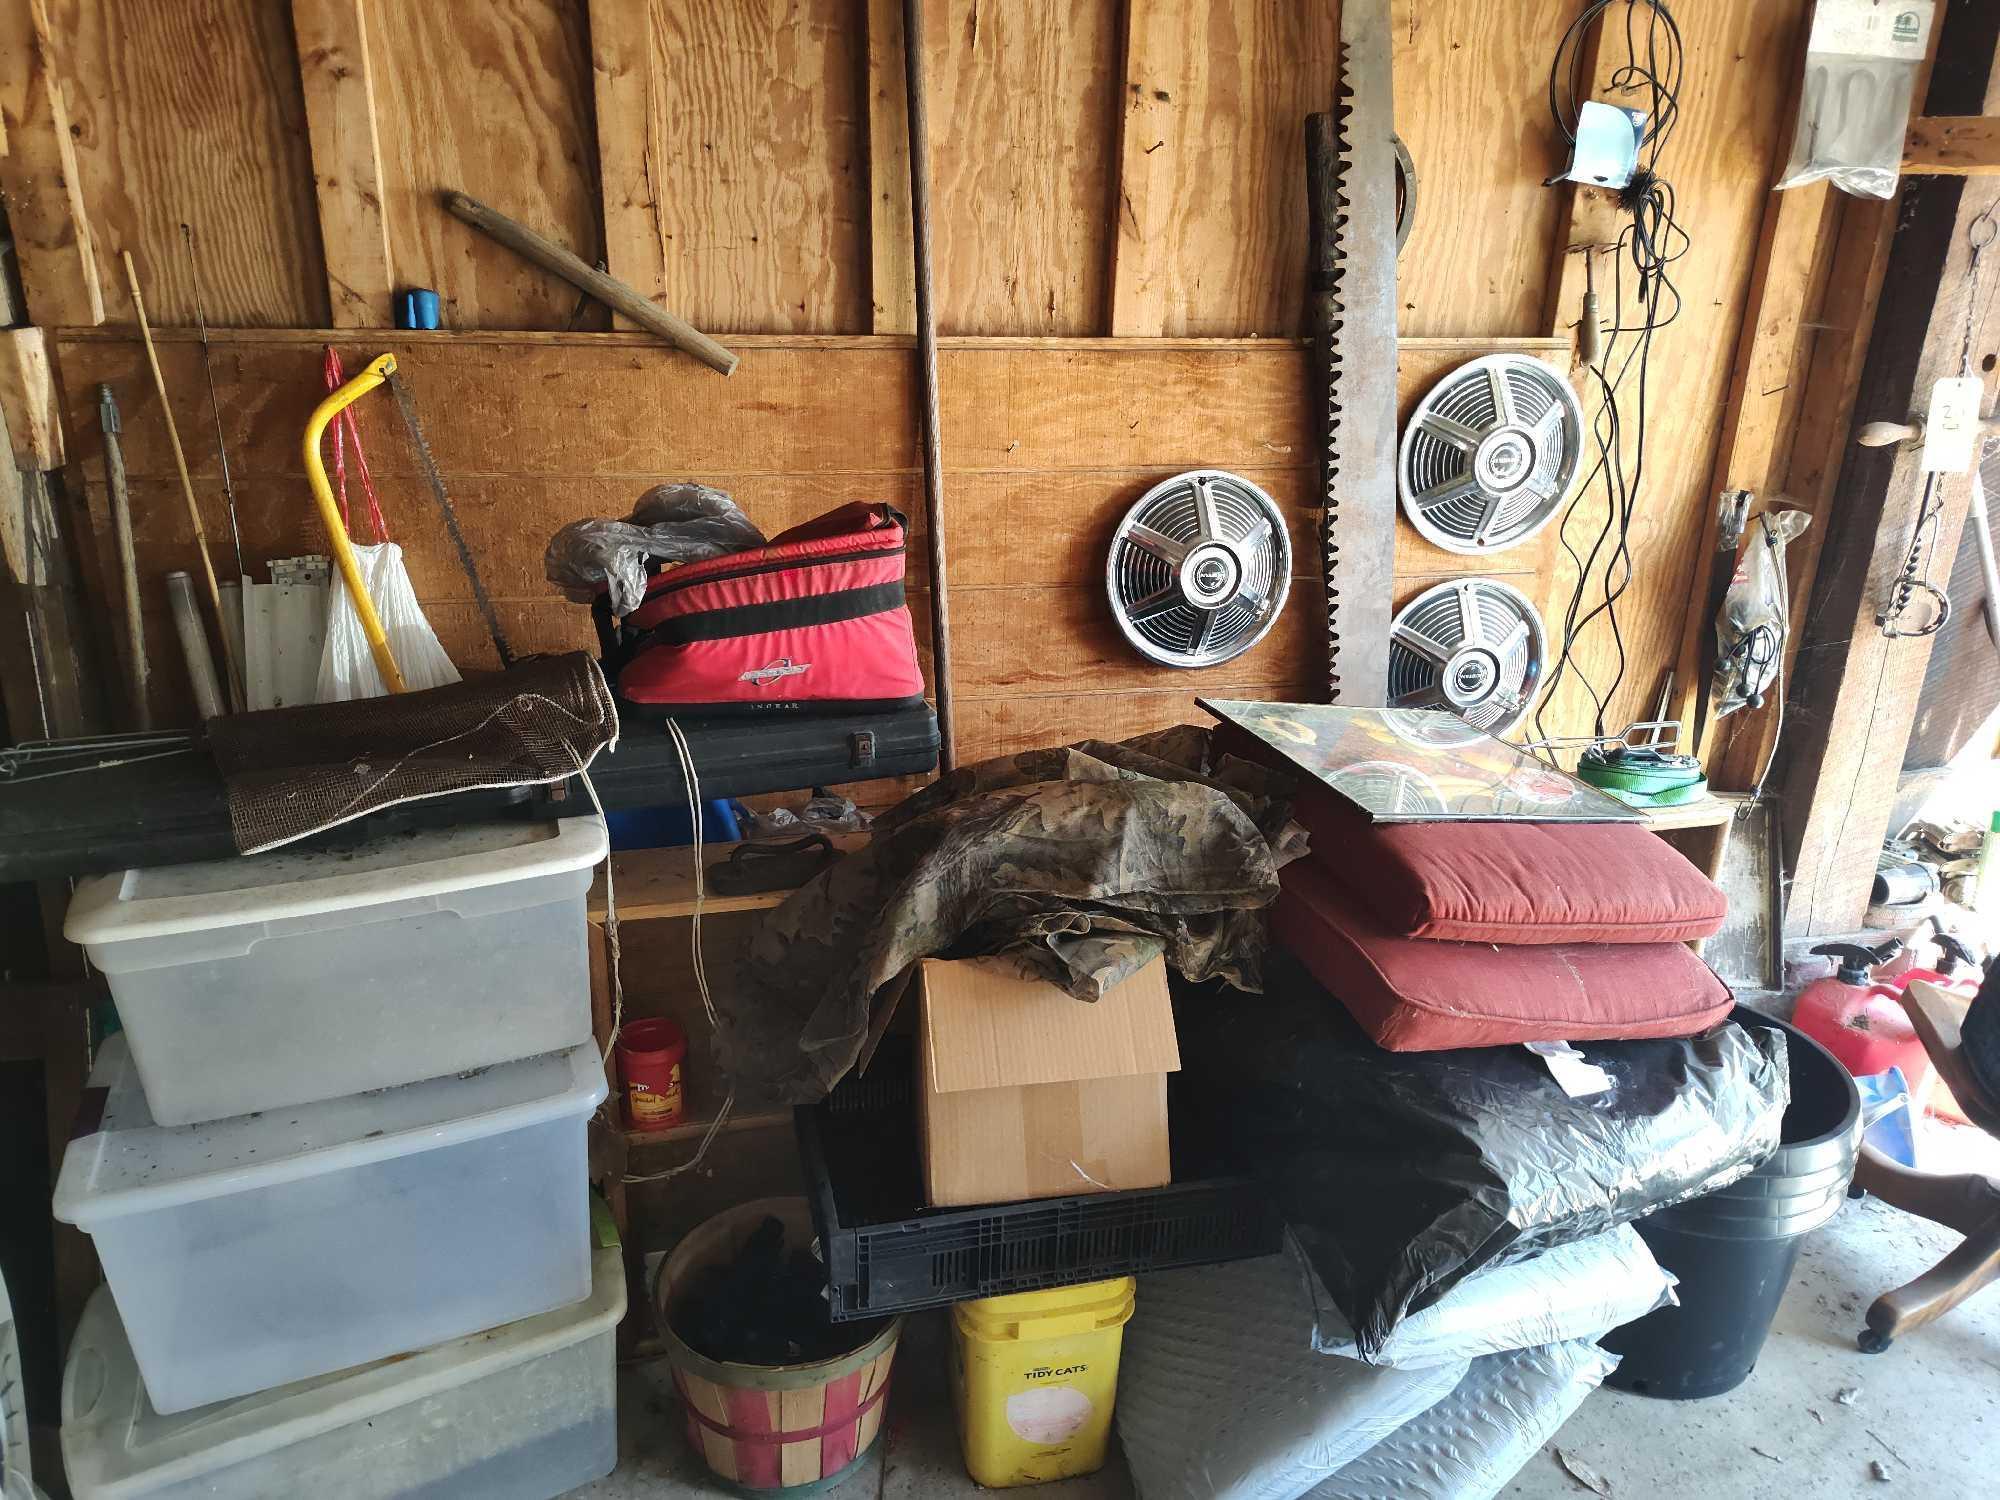 Contents of Wall Garage, Saw, Hubcaps, totes, gas cans